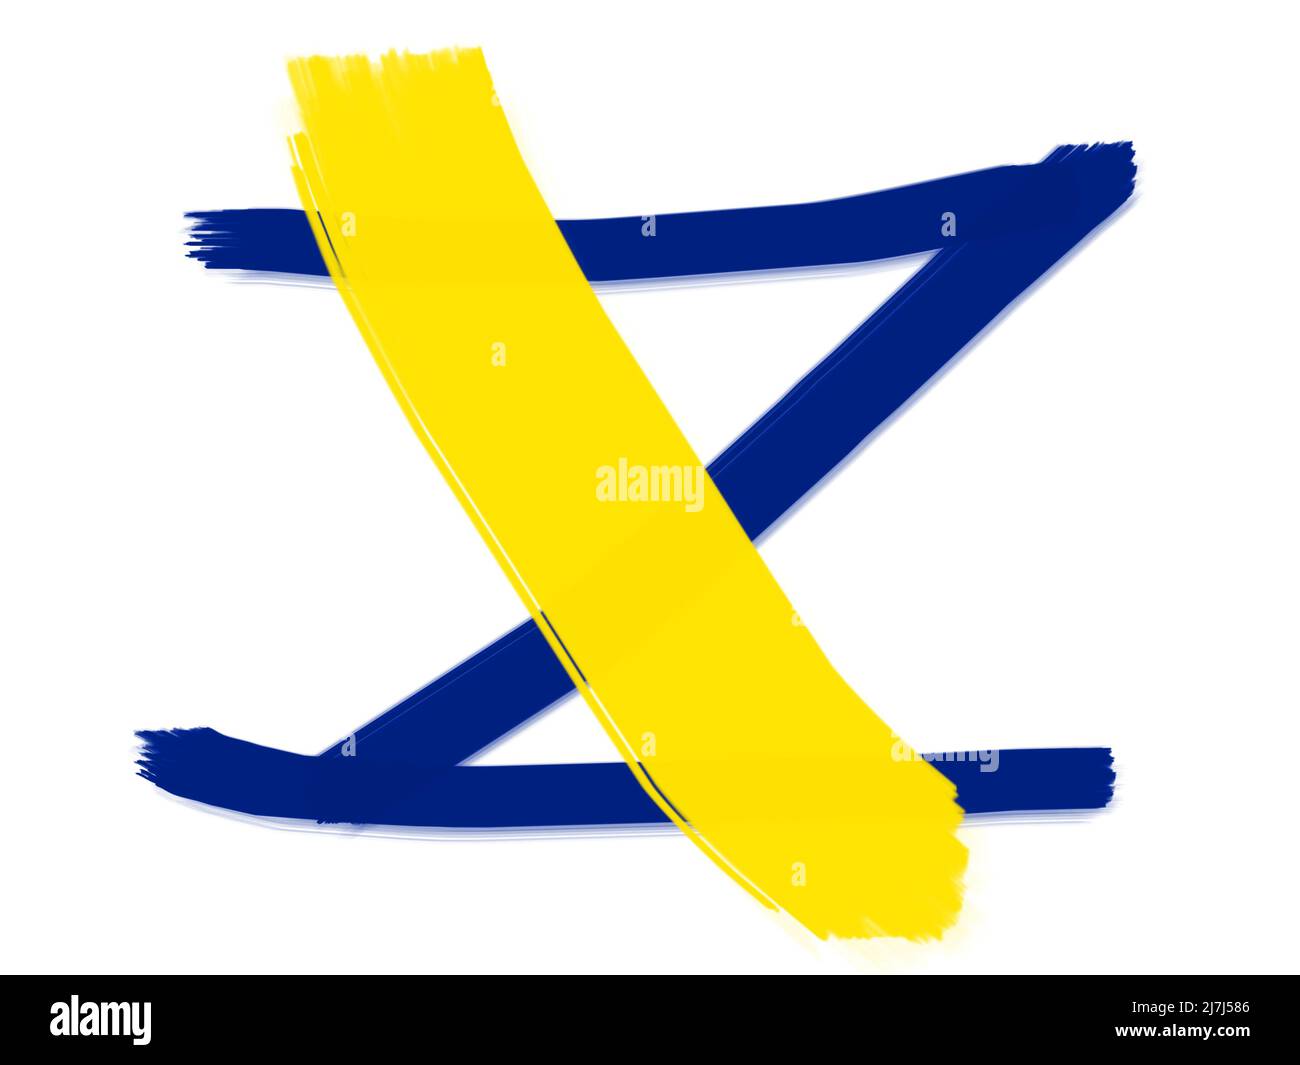 Anti-war concert. A blue letter Z crossed out with a yellow line in the form of a brush stroke. Stock Photo